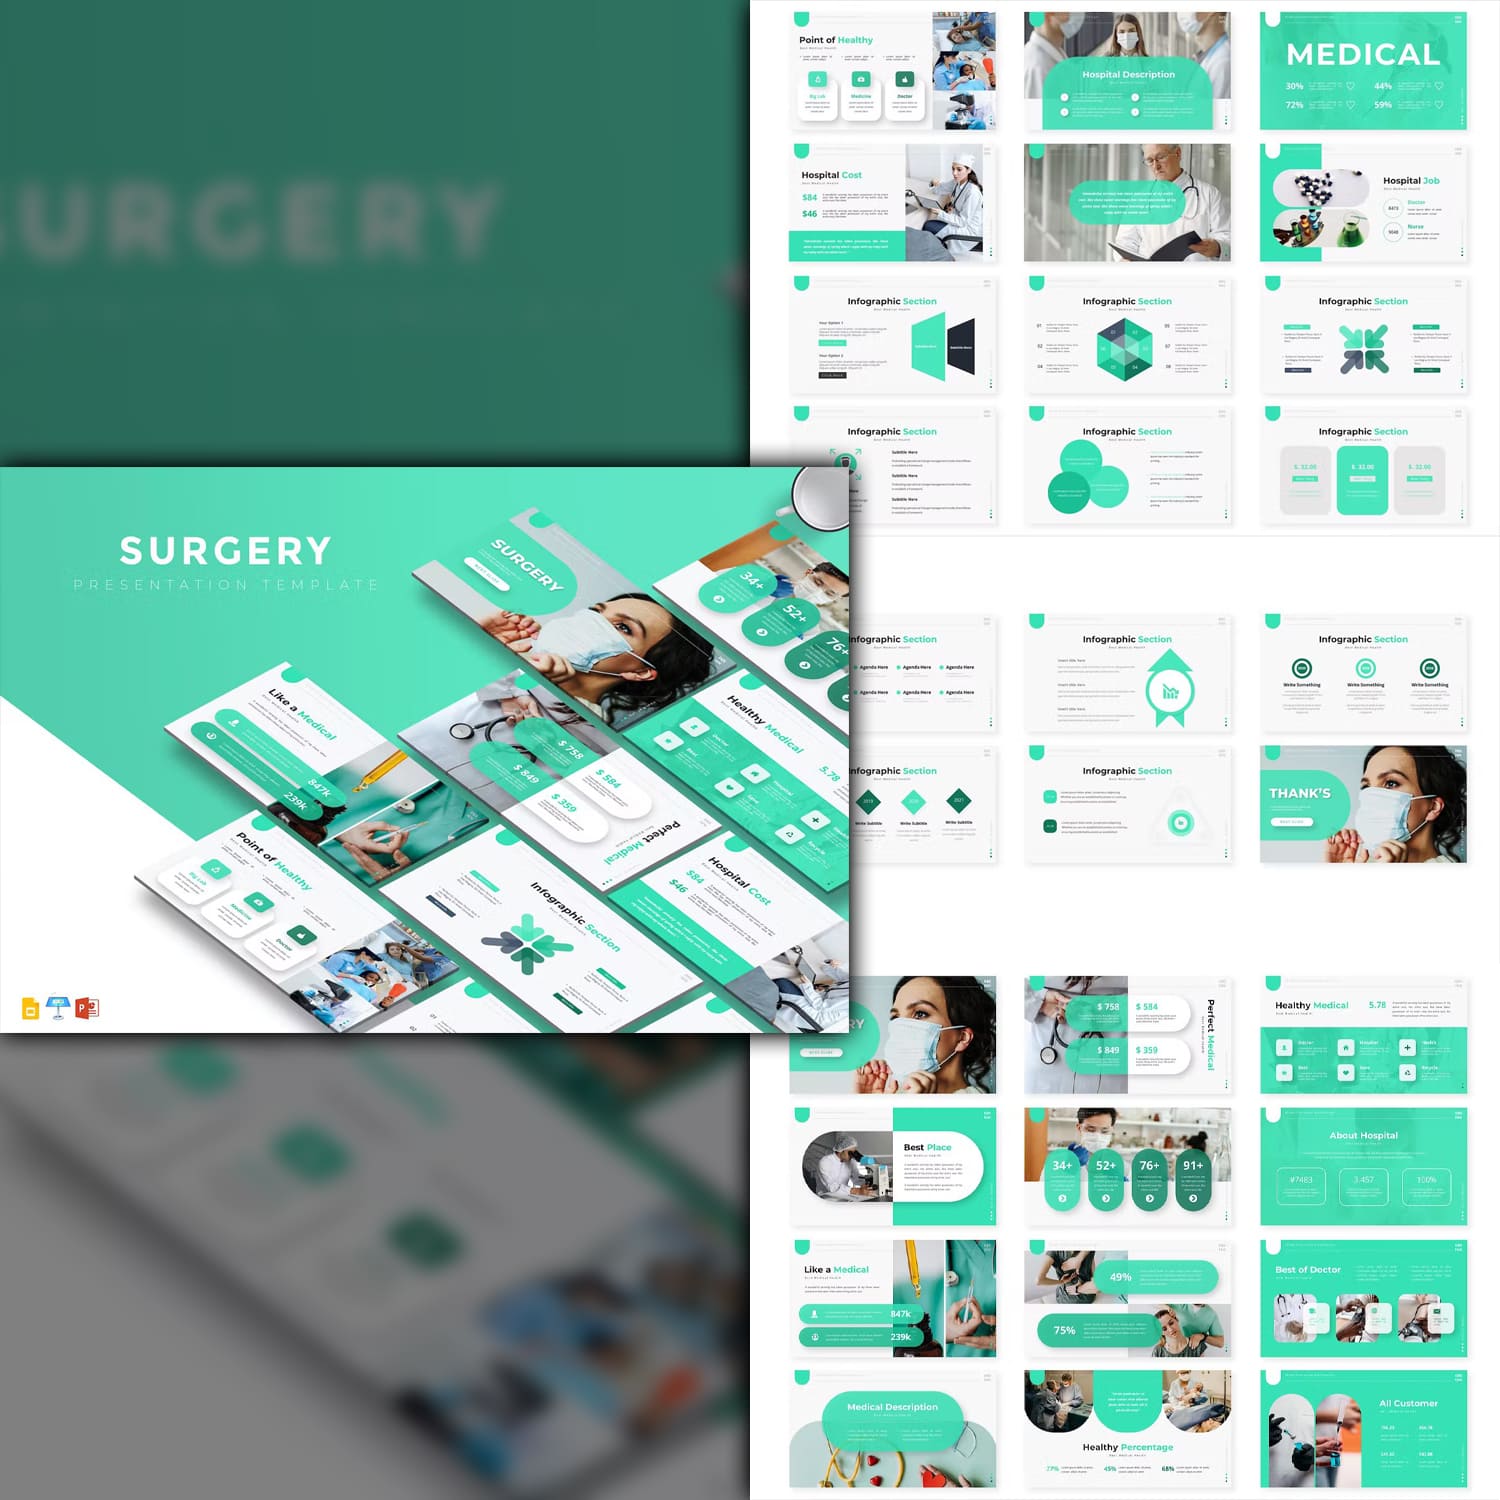 Surgery presentation template from aqrstudio.